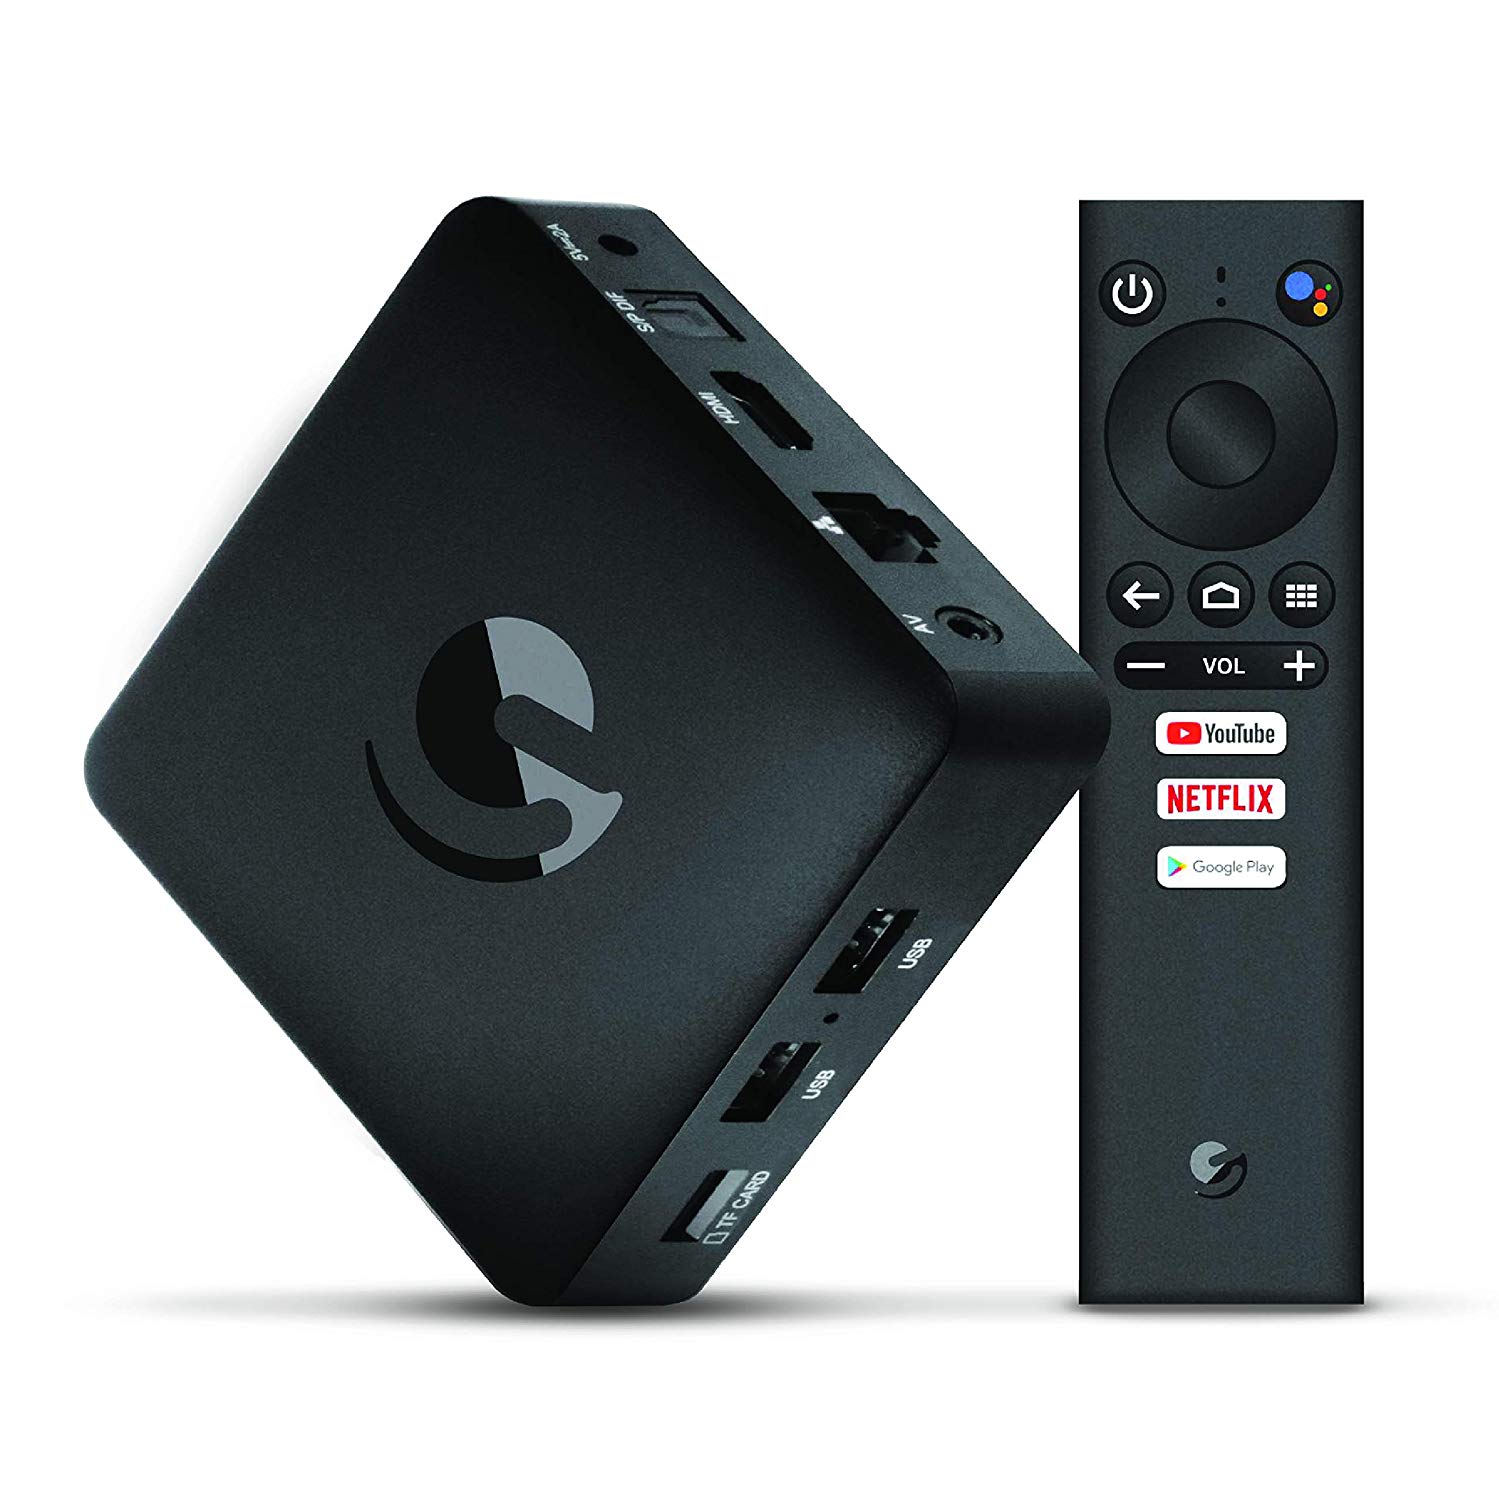 Ematic 4K Android TV Box